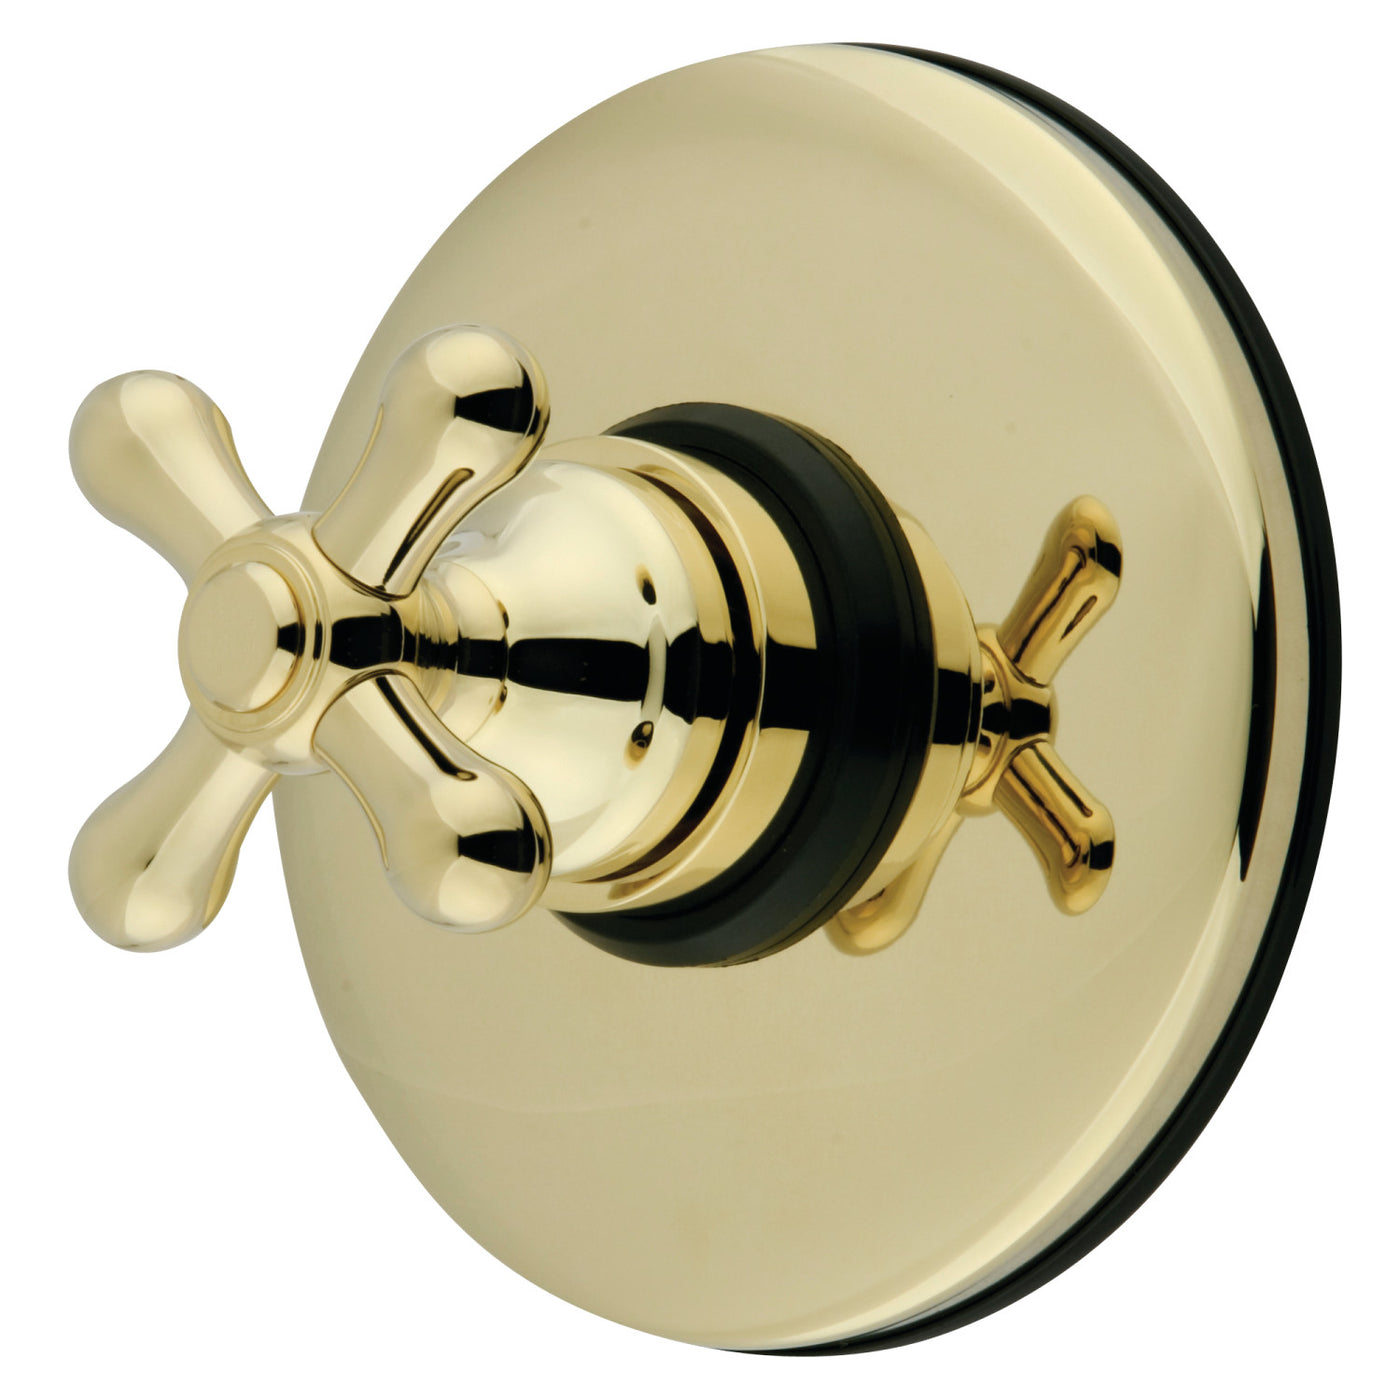 Elements of Design EB3002AX Volume Control, Polished Brass